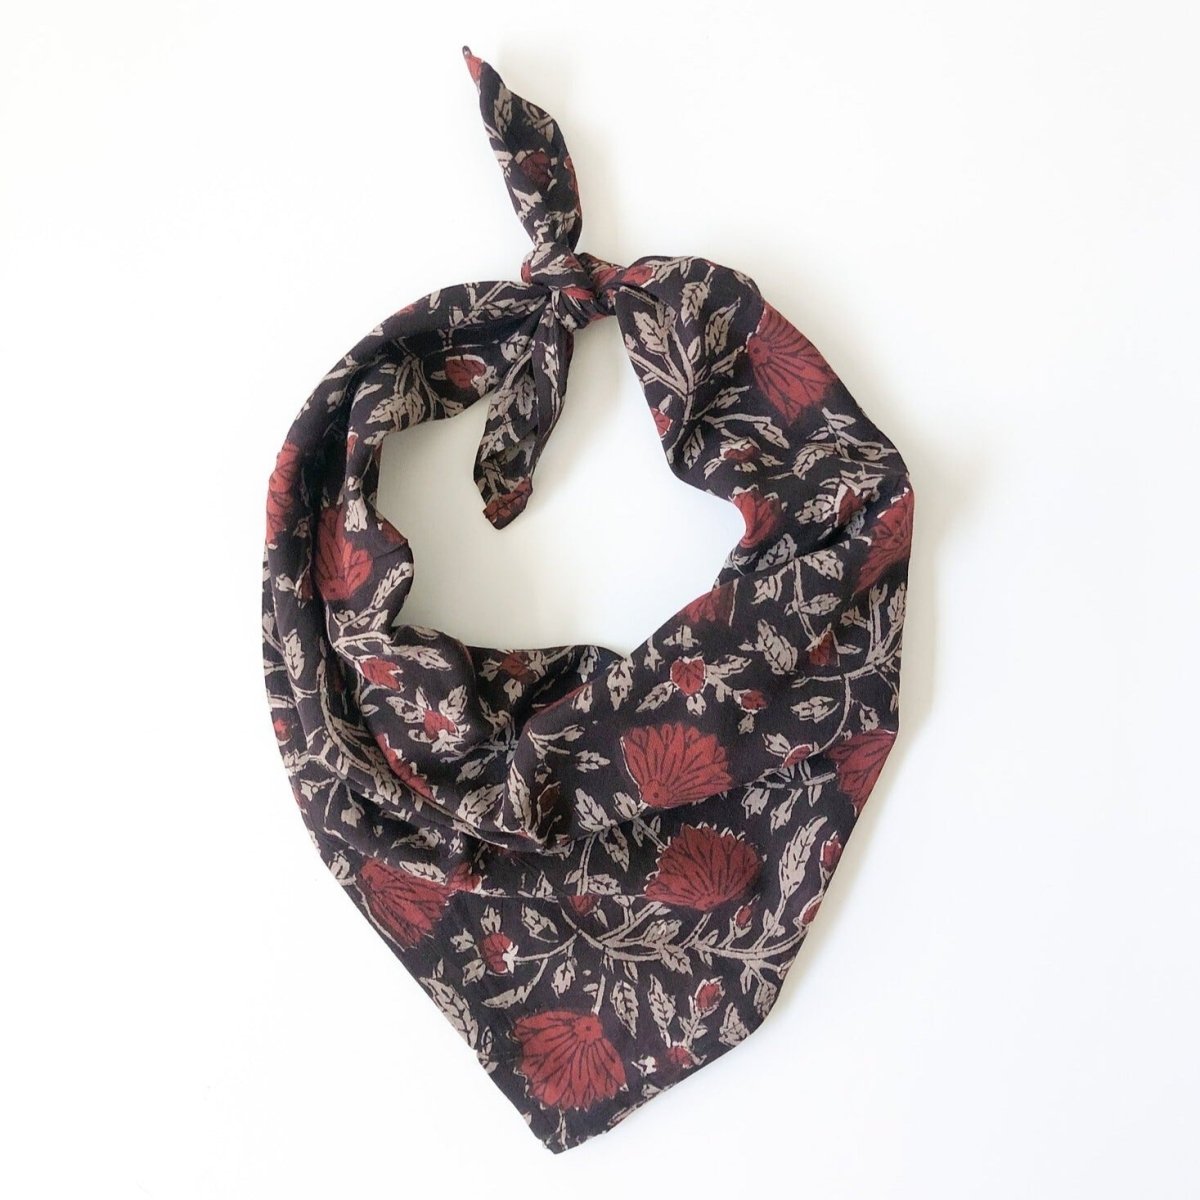 A floral printed bandana, folded over and tied in a knot. Block printed by hand, the Rosa Bandana from Maelu is designed in Portland, Oregon and handmade in India.